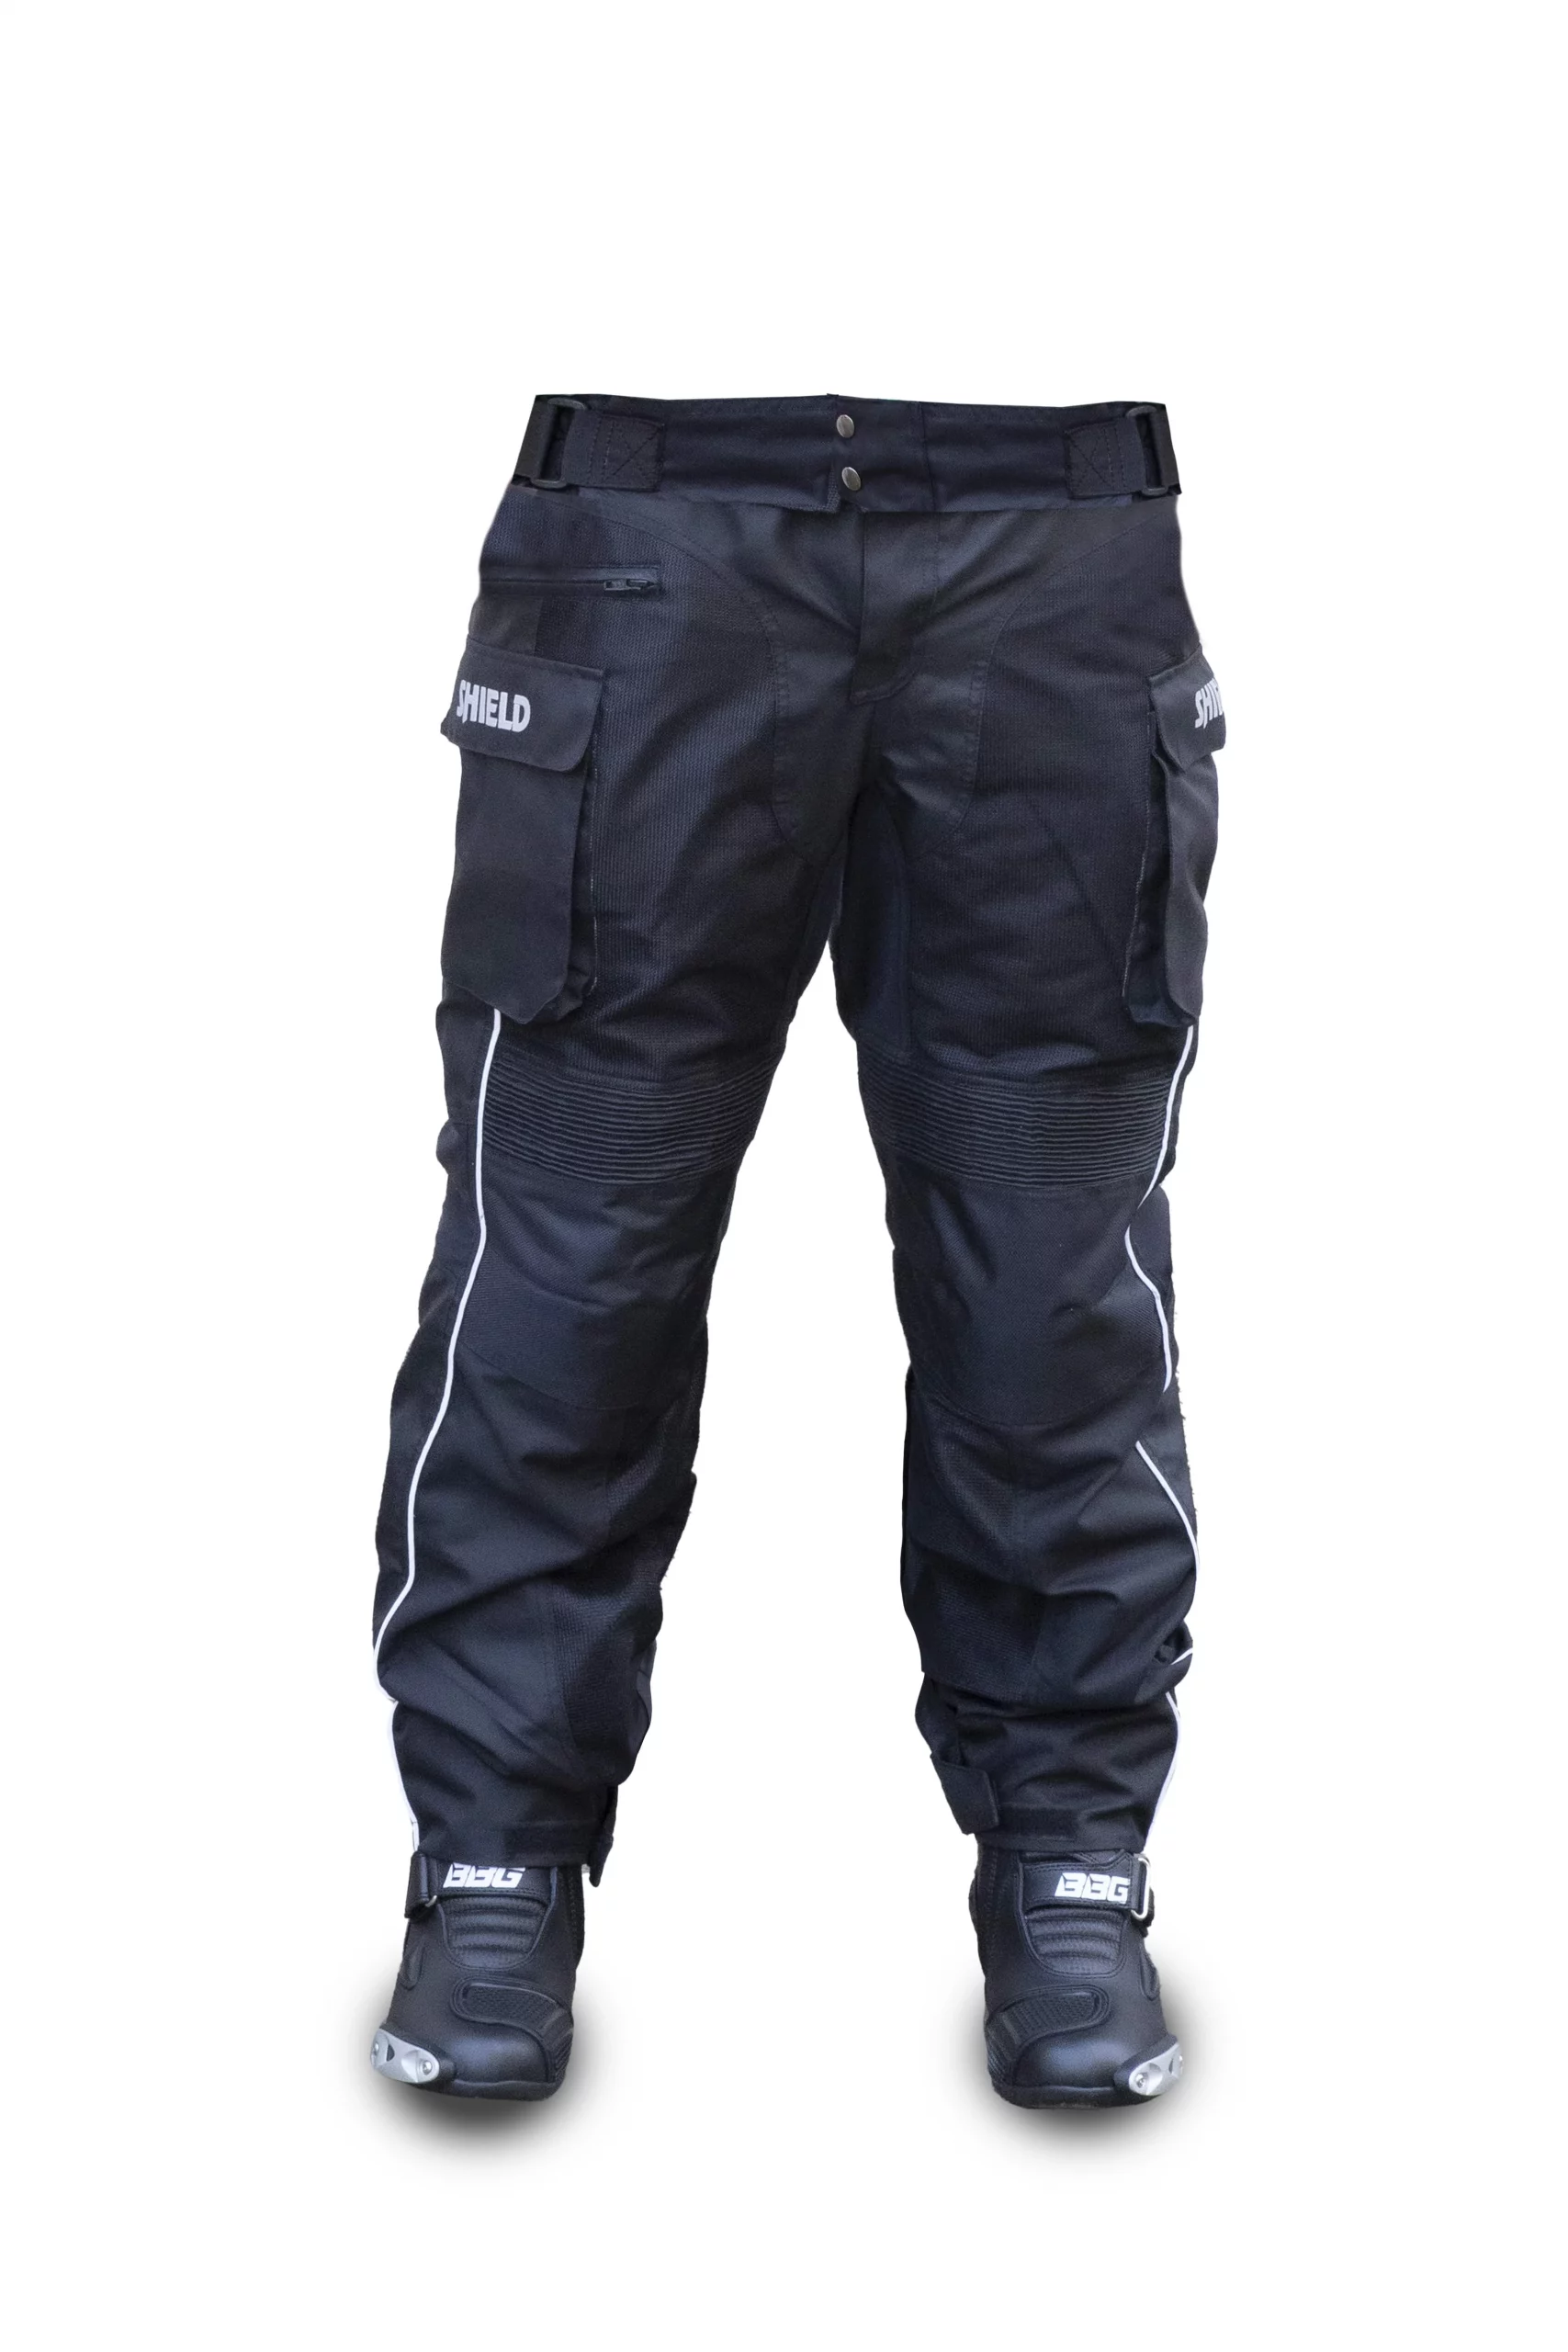 BBG Snell Shield Black Riding Pant 1 scaled